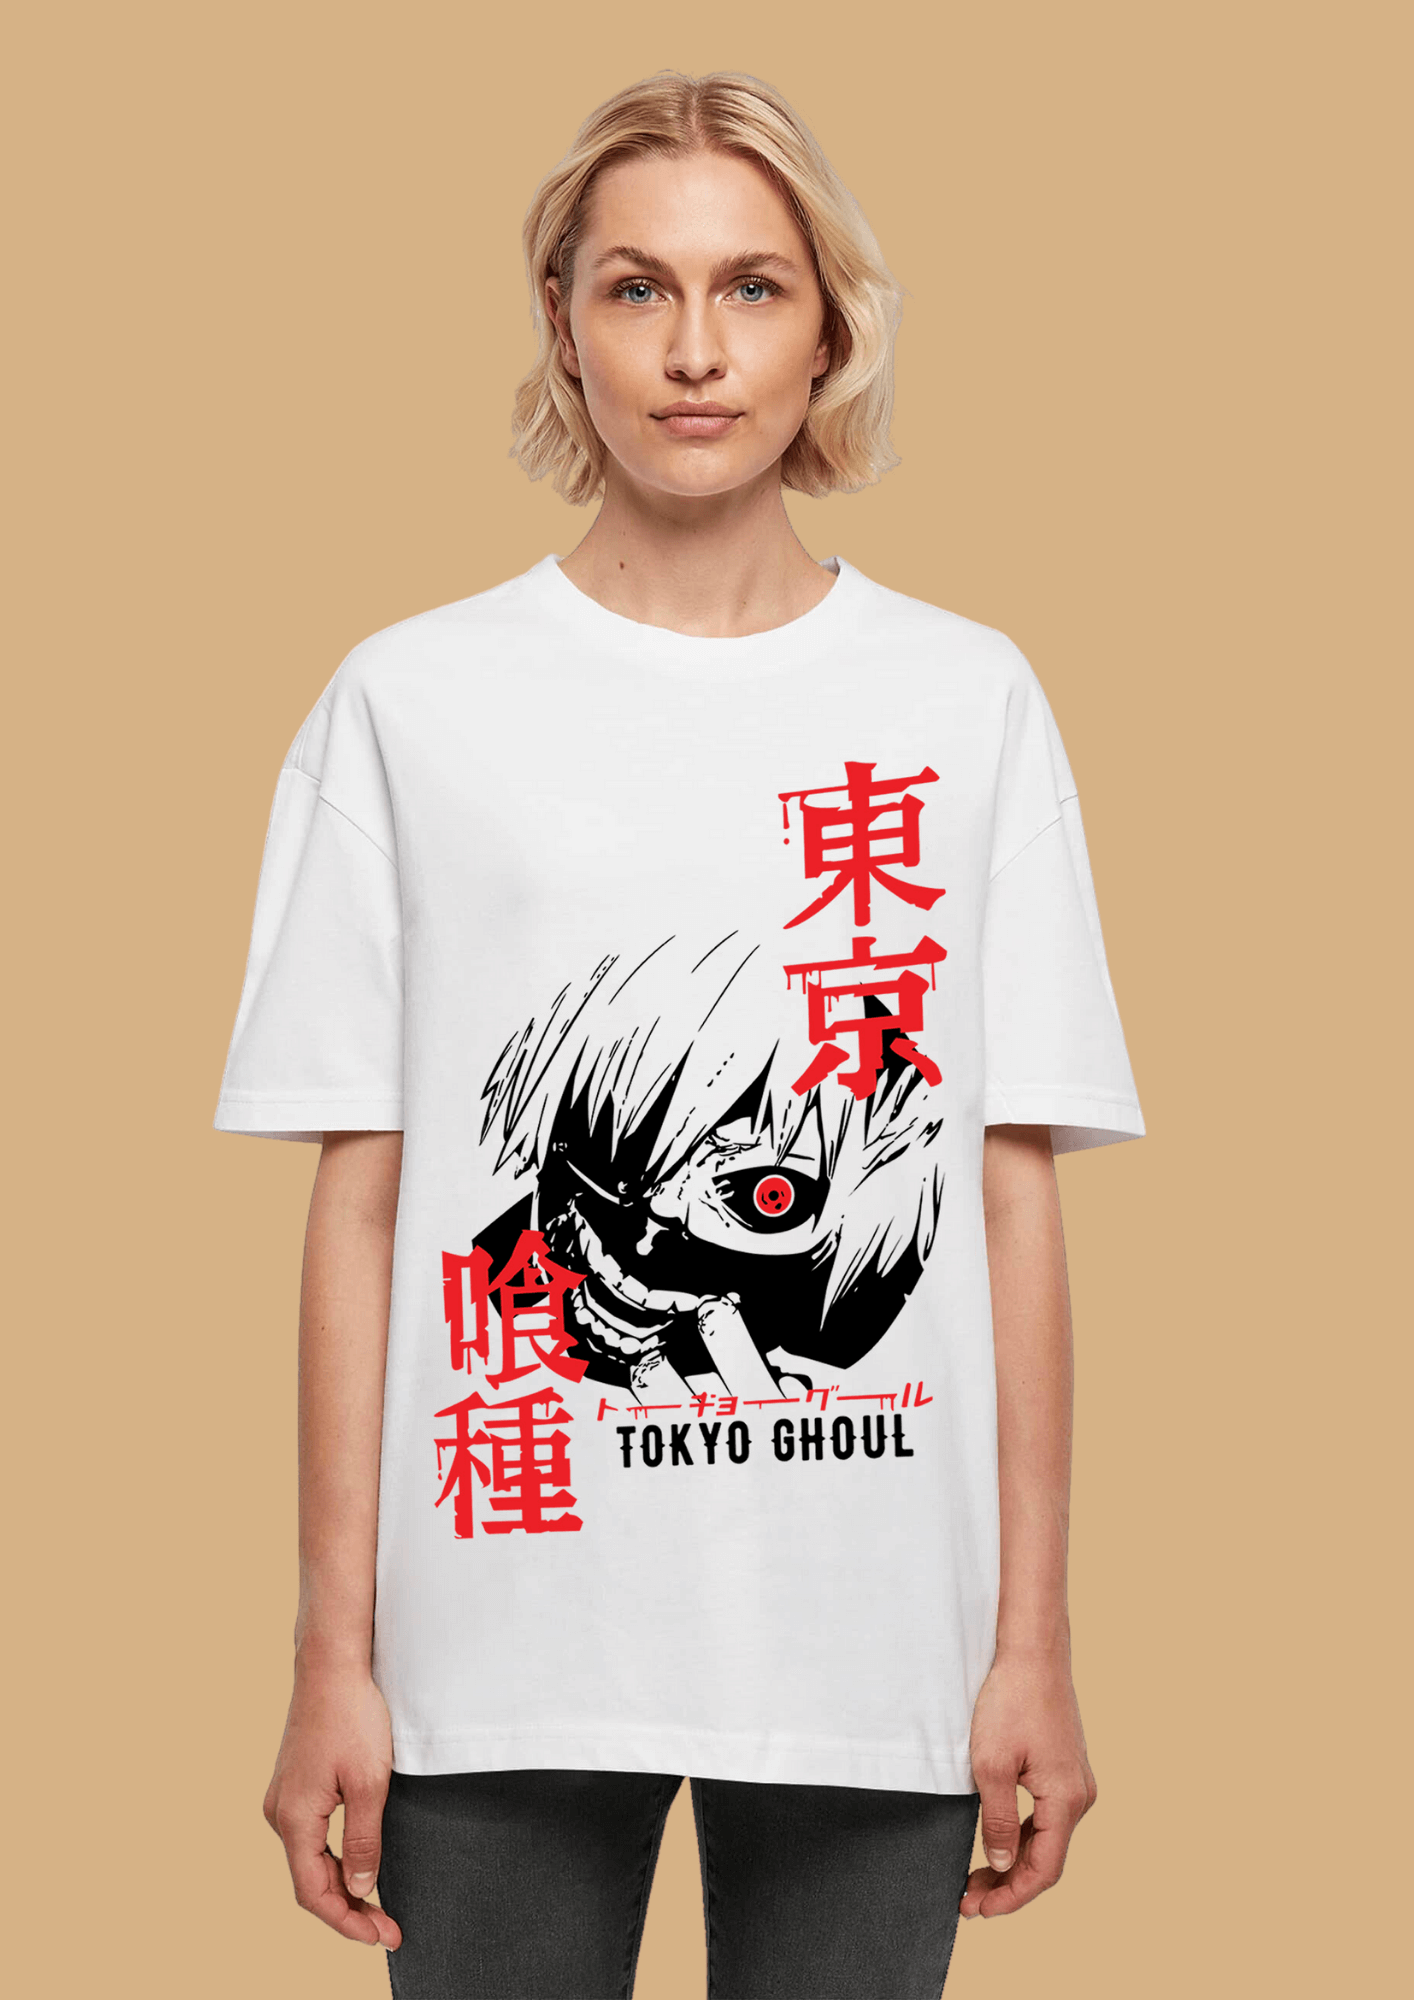 Tokyo ghoul printed white color oversized t-shirt by offmint